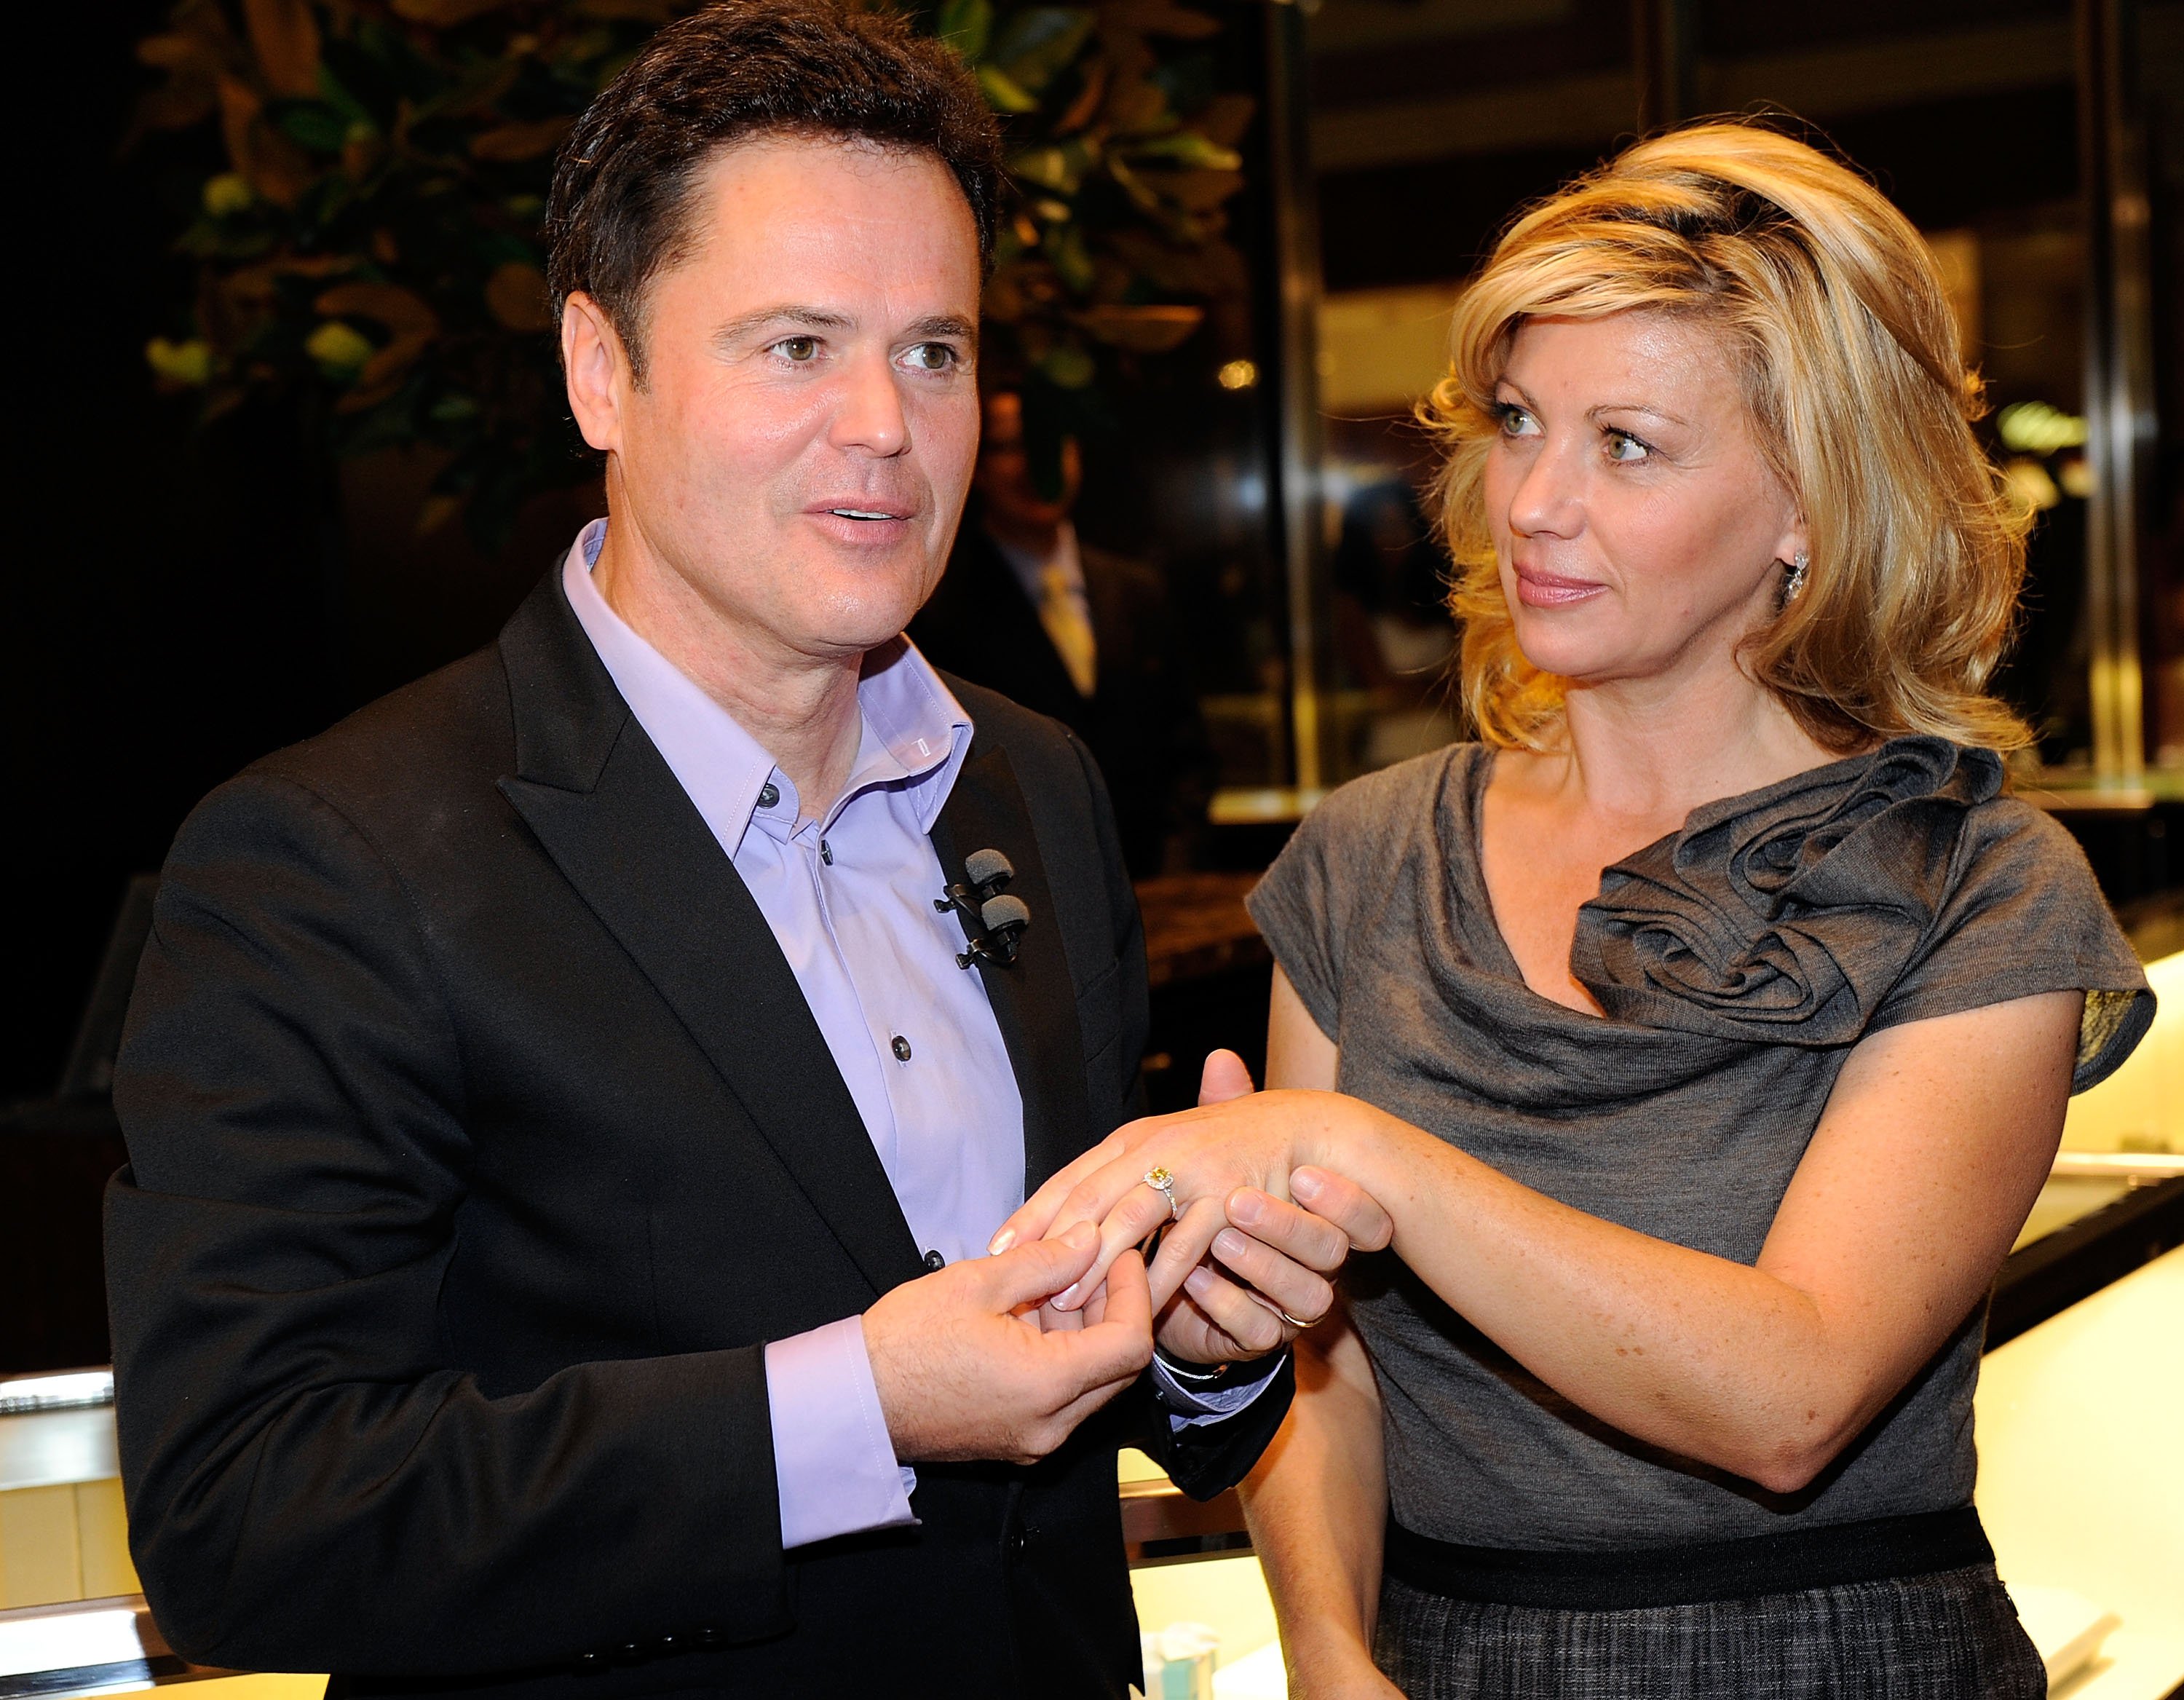 Singer Donny Osmond and his wife, actress Debbie Osmond pictured looking at Tiffany & Co. engagement rings at The Forum Shops at Caesars on October 10, 2010 in Las Vegas, Nevada. | Source: Getty Images